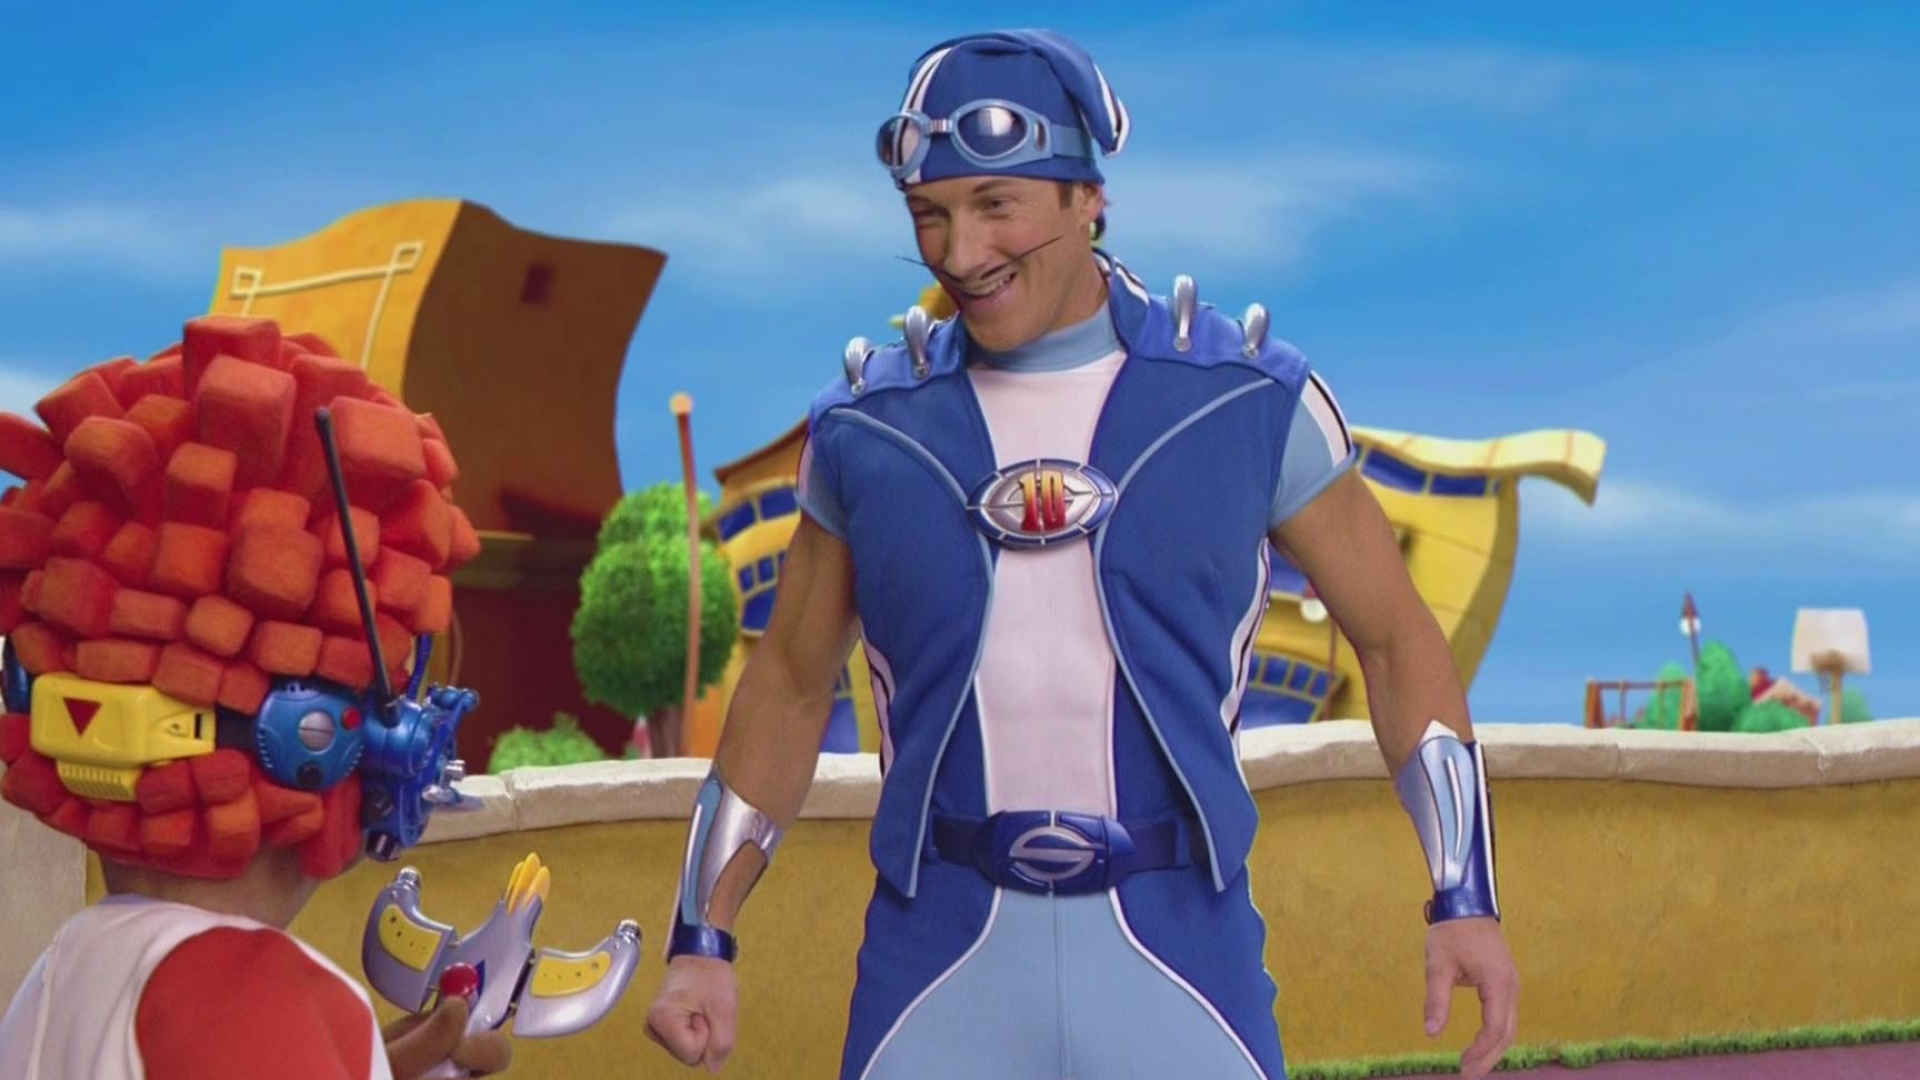 LazyTown TV Series, 4K wallpapers, HQ pictures, 2019 collection, 1920x1080 Full HD Desktop